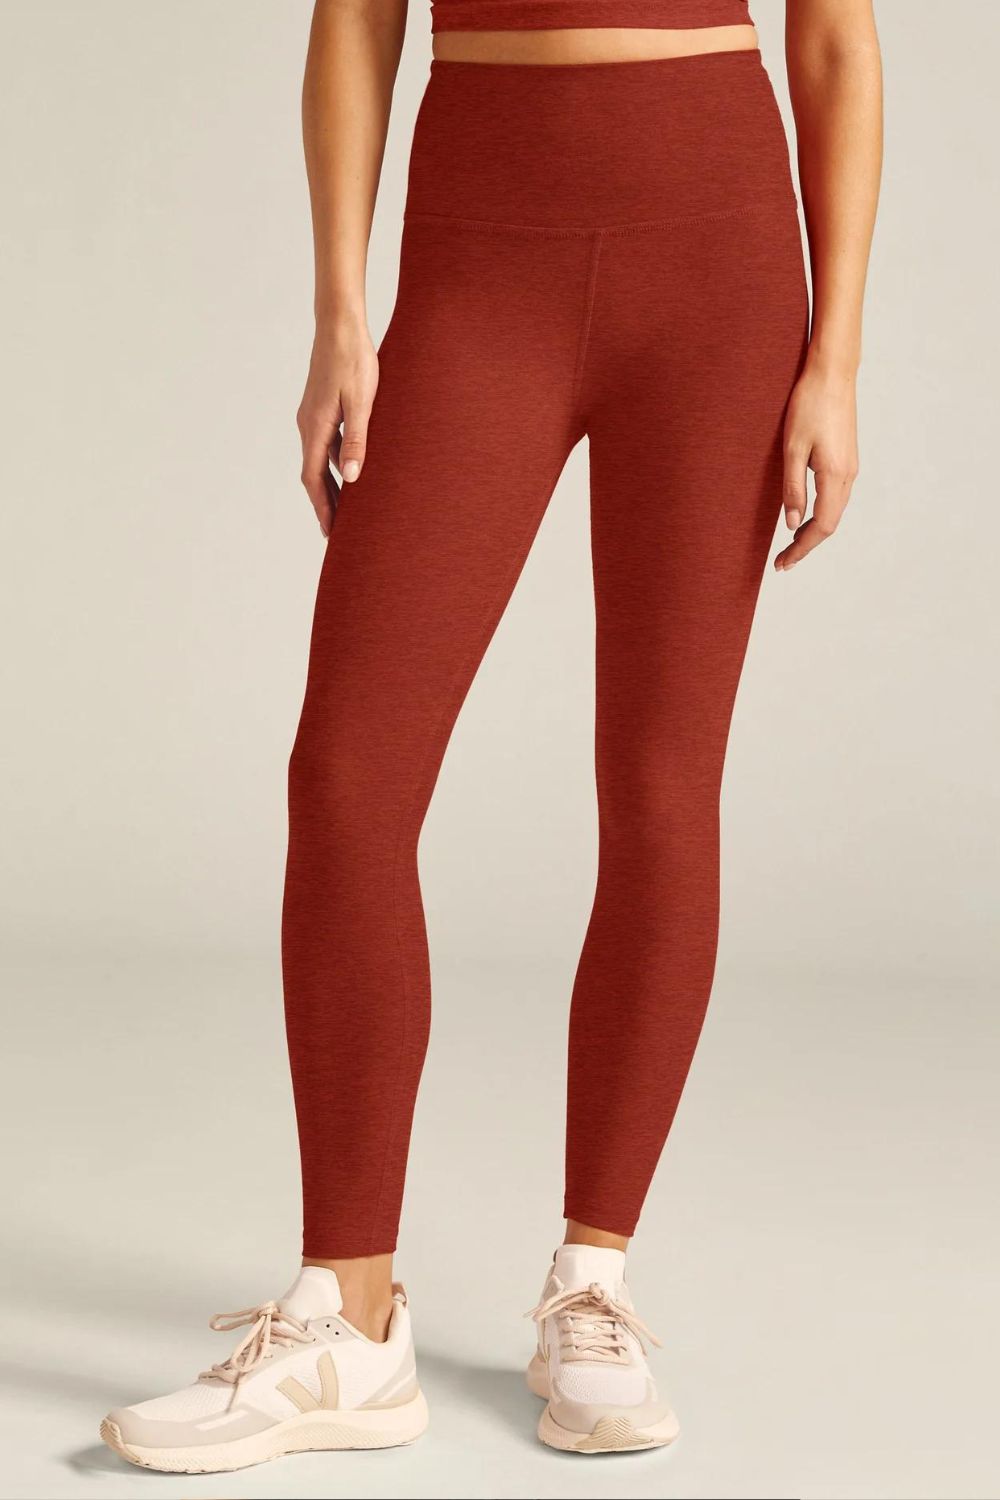 Beyond Yoga Caught in the Midi Legging - Red Sand Heather